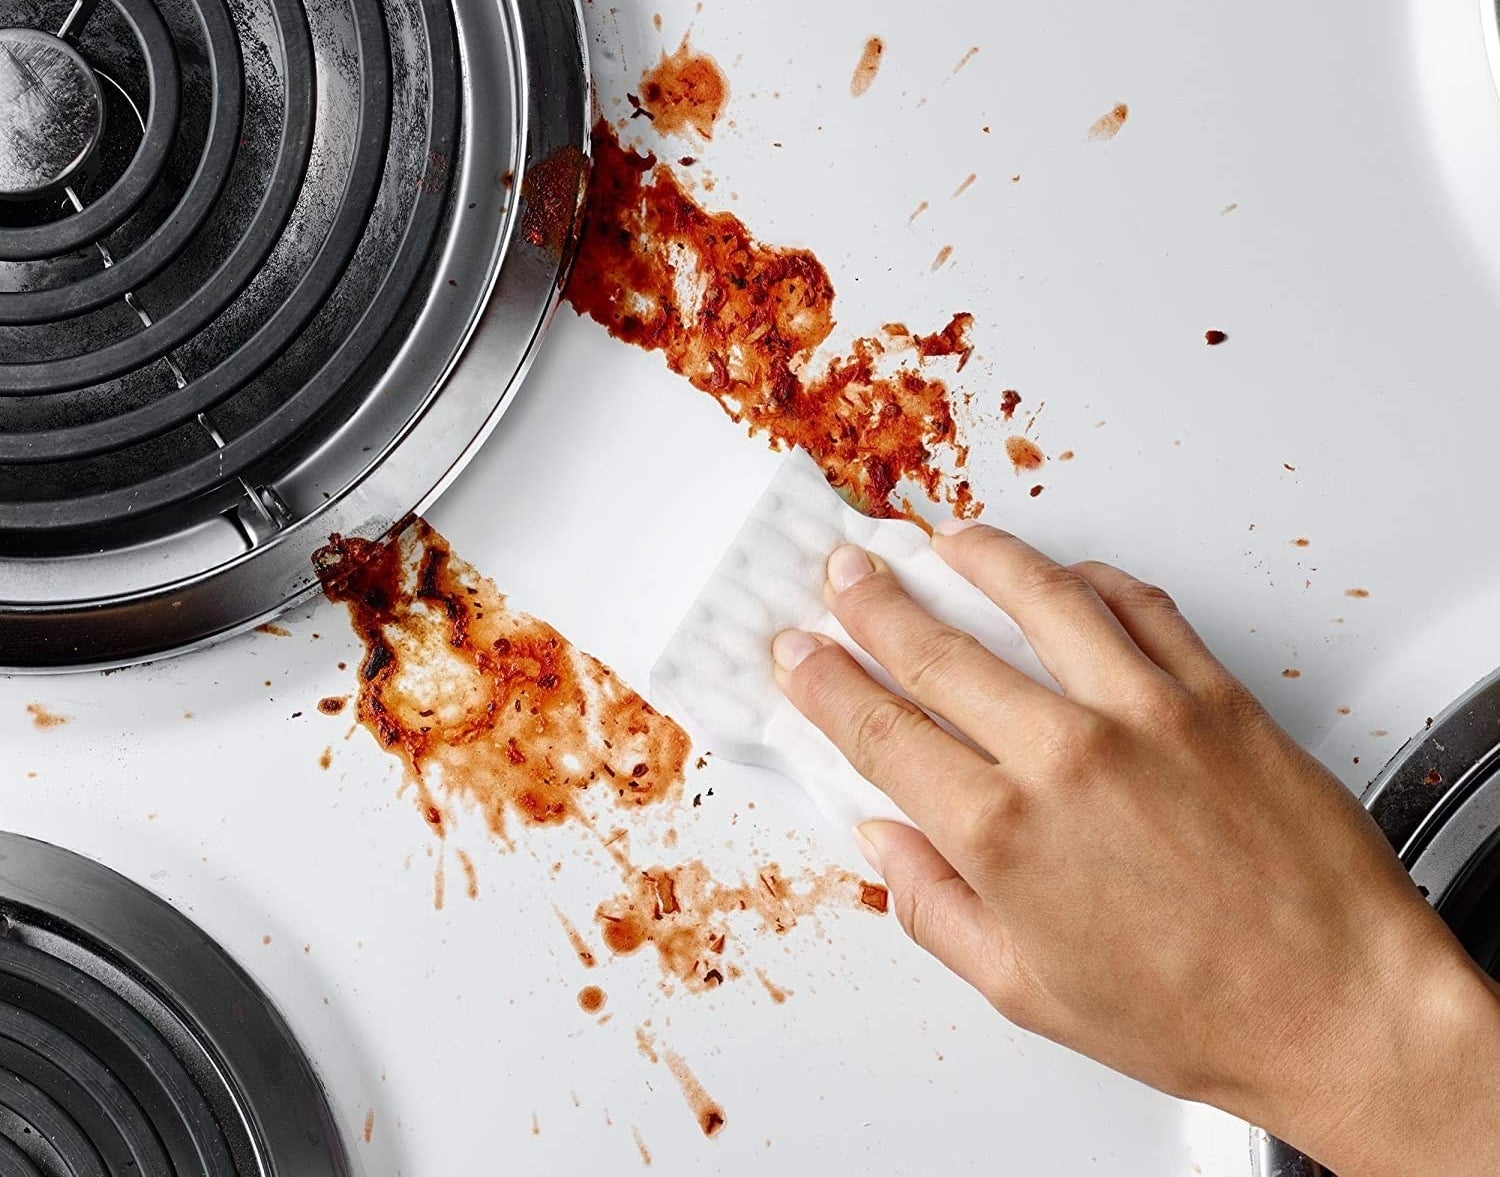 Magic eraser cloth swiping tomato sauce-splatted stove top clean 